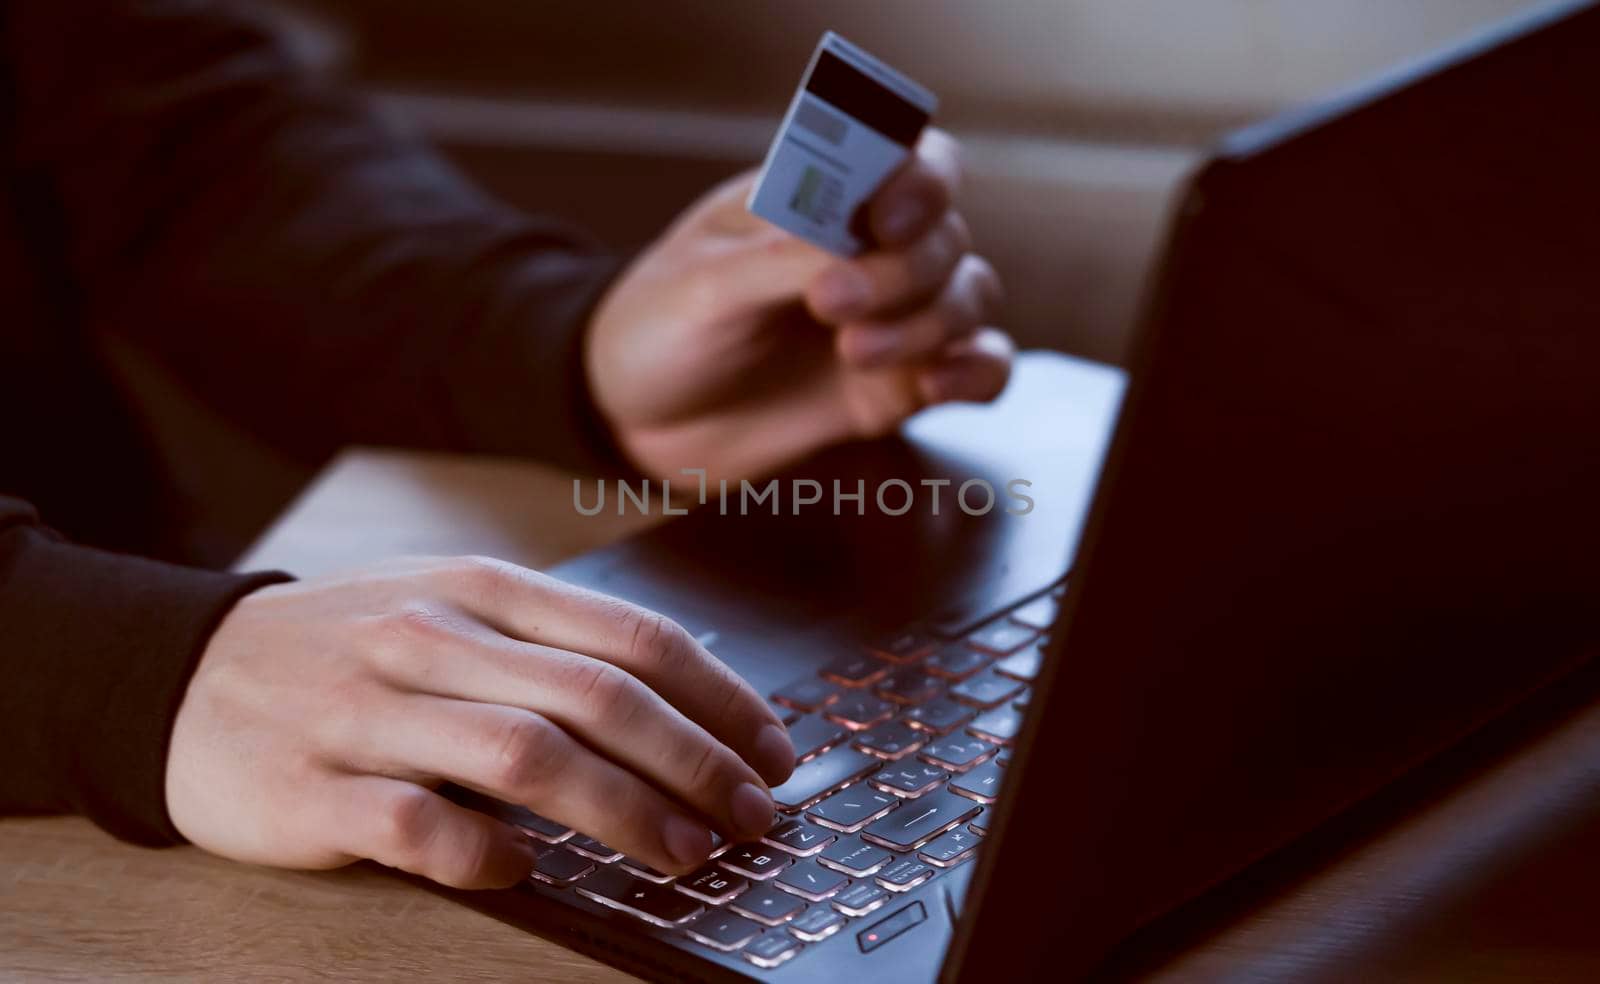 A man holds a bank card in his hand and types on a laptop keyboard, pays for purchases, makes online banking through an application, close-up view of his hands.